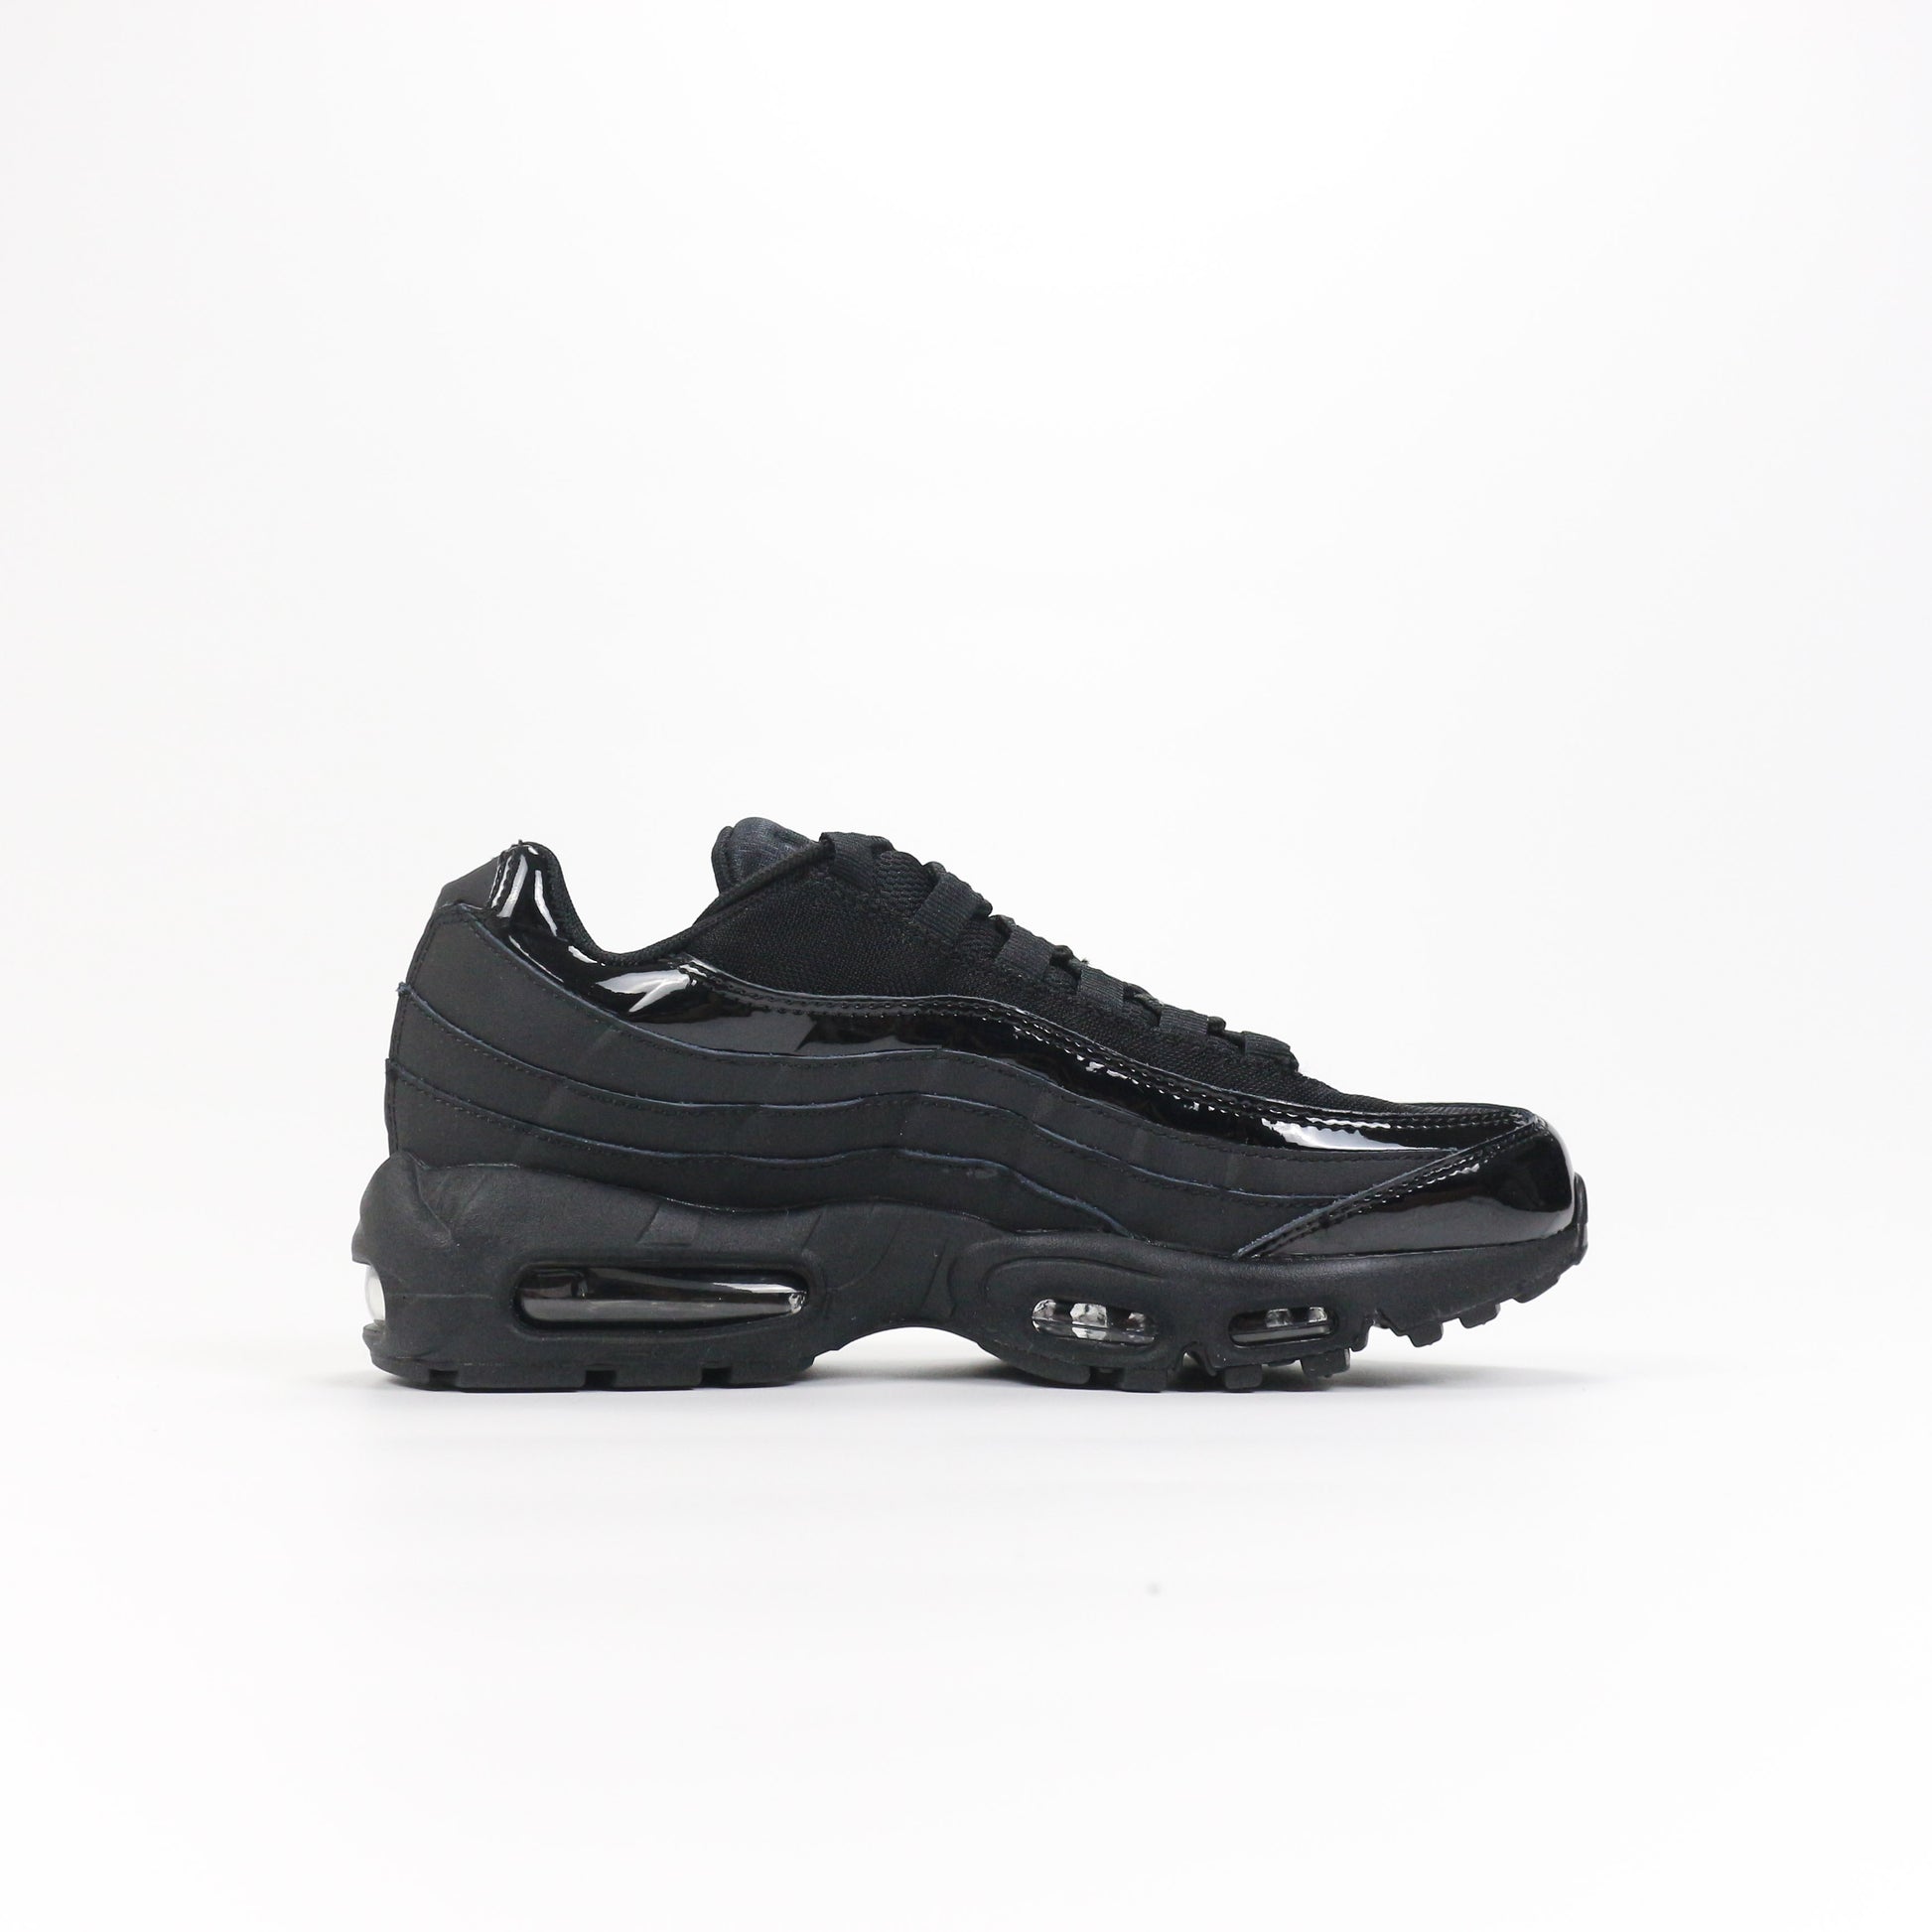 Air Max 95 - whatever on 